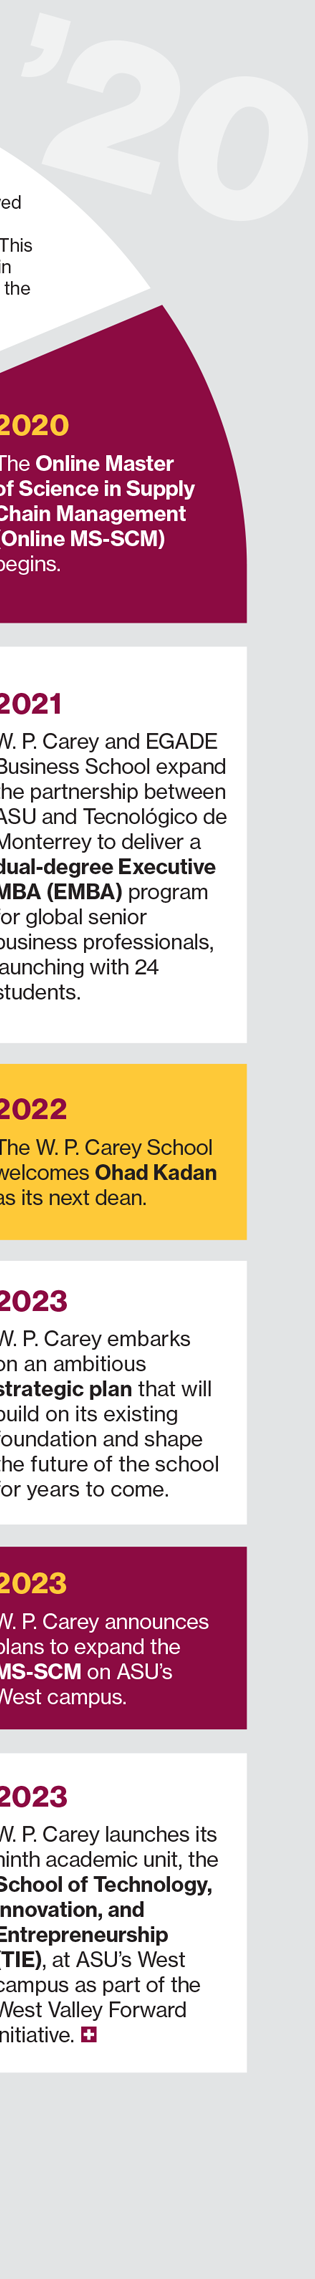 In recent years, W. P. Carey achieved several significant milestones, including the launch of the Online Master of Science in Supply Chain Management in 2020 and the expansion of the partnership with EGADE Business School in 2021 to deliver a dual-degree Executive MBA program. Ohad Kadan was welcomed as the new dean in 2022. In 2023, W. P. Carey initiated an ambitious strategic plan, expanded the MS-SCM program on ASUs West campus, and launched its ninth academic unit, the School of Technology, Innovation, and Entrepreneurship, as part of the West Valley Forward initiative.